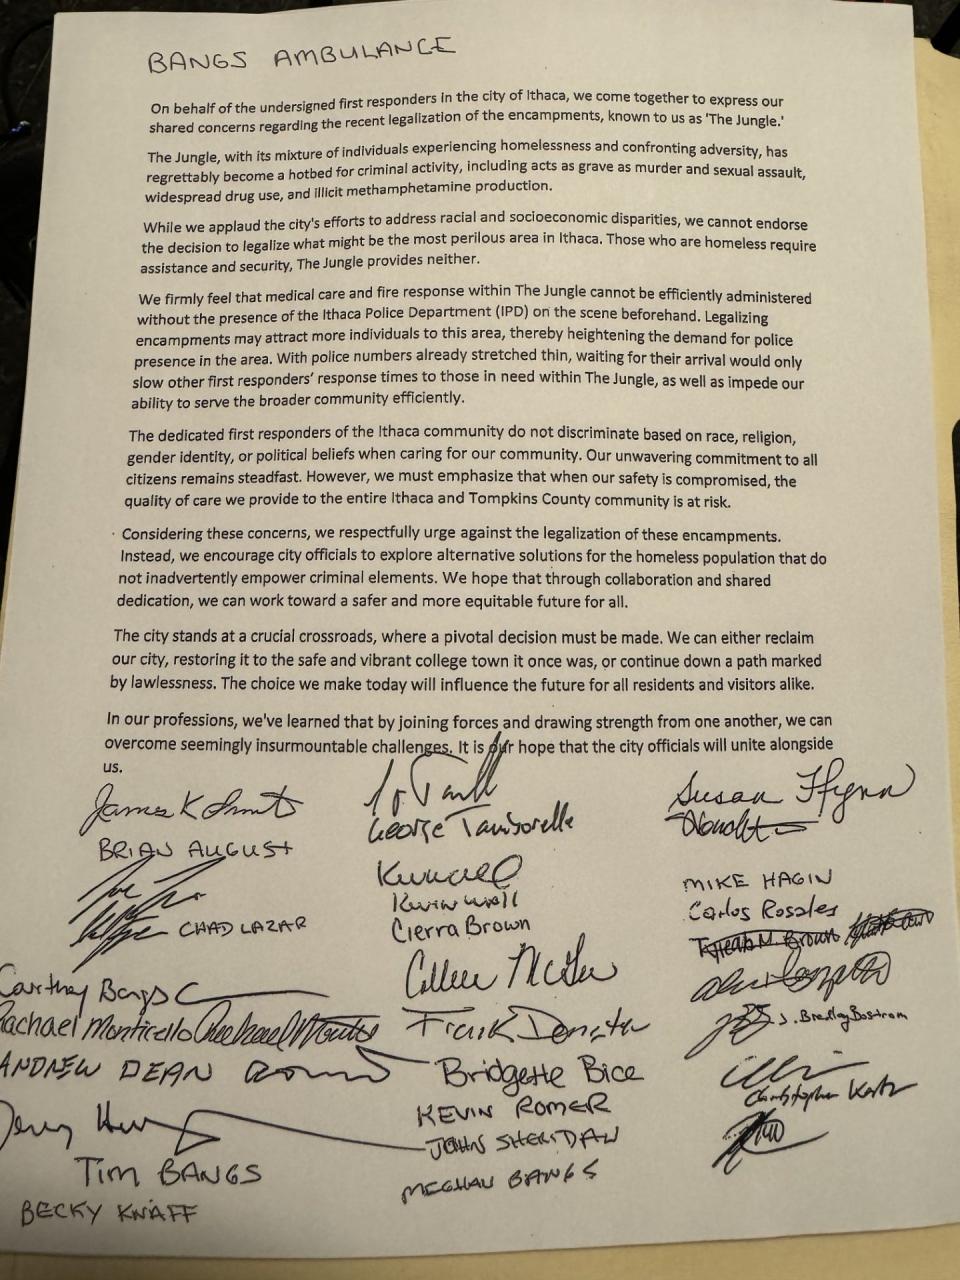 The statement signed by Tompkins County first responders at Bangs Ambulance, much of which paramedic James Smith read aloud at an Ithaca Common Council meeting Sept. 20.